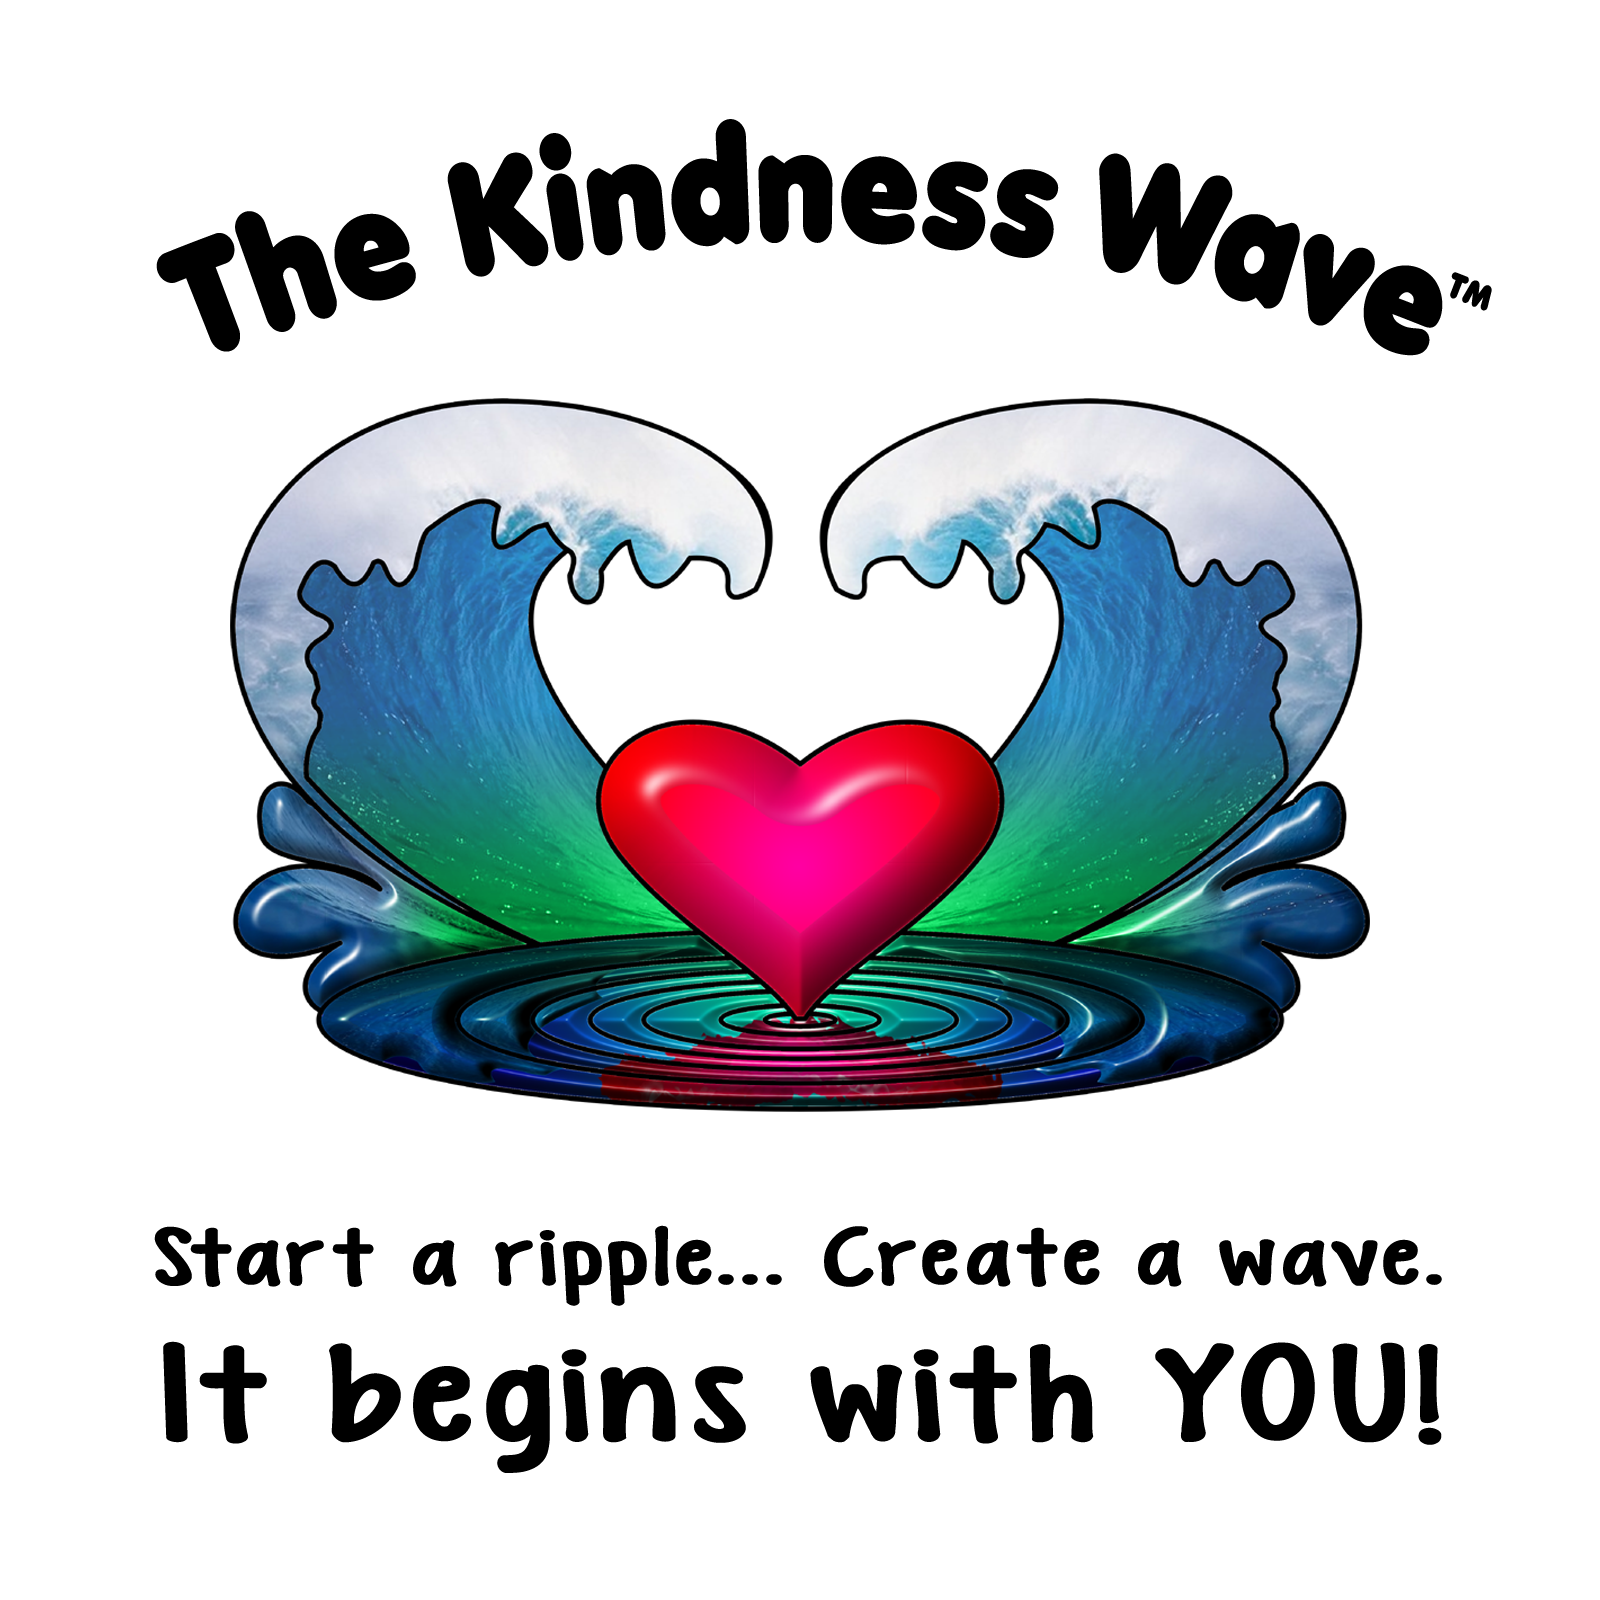 Clipart of the Kindness free image download